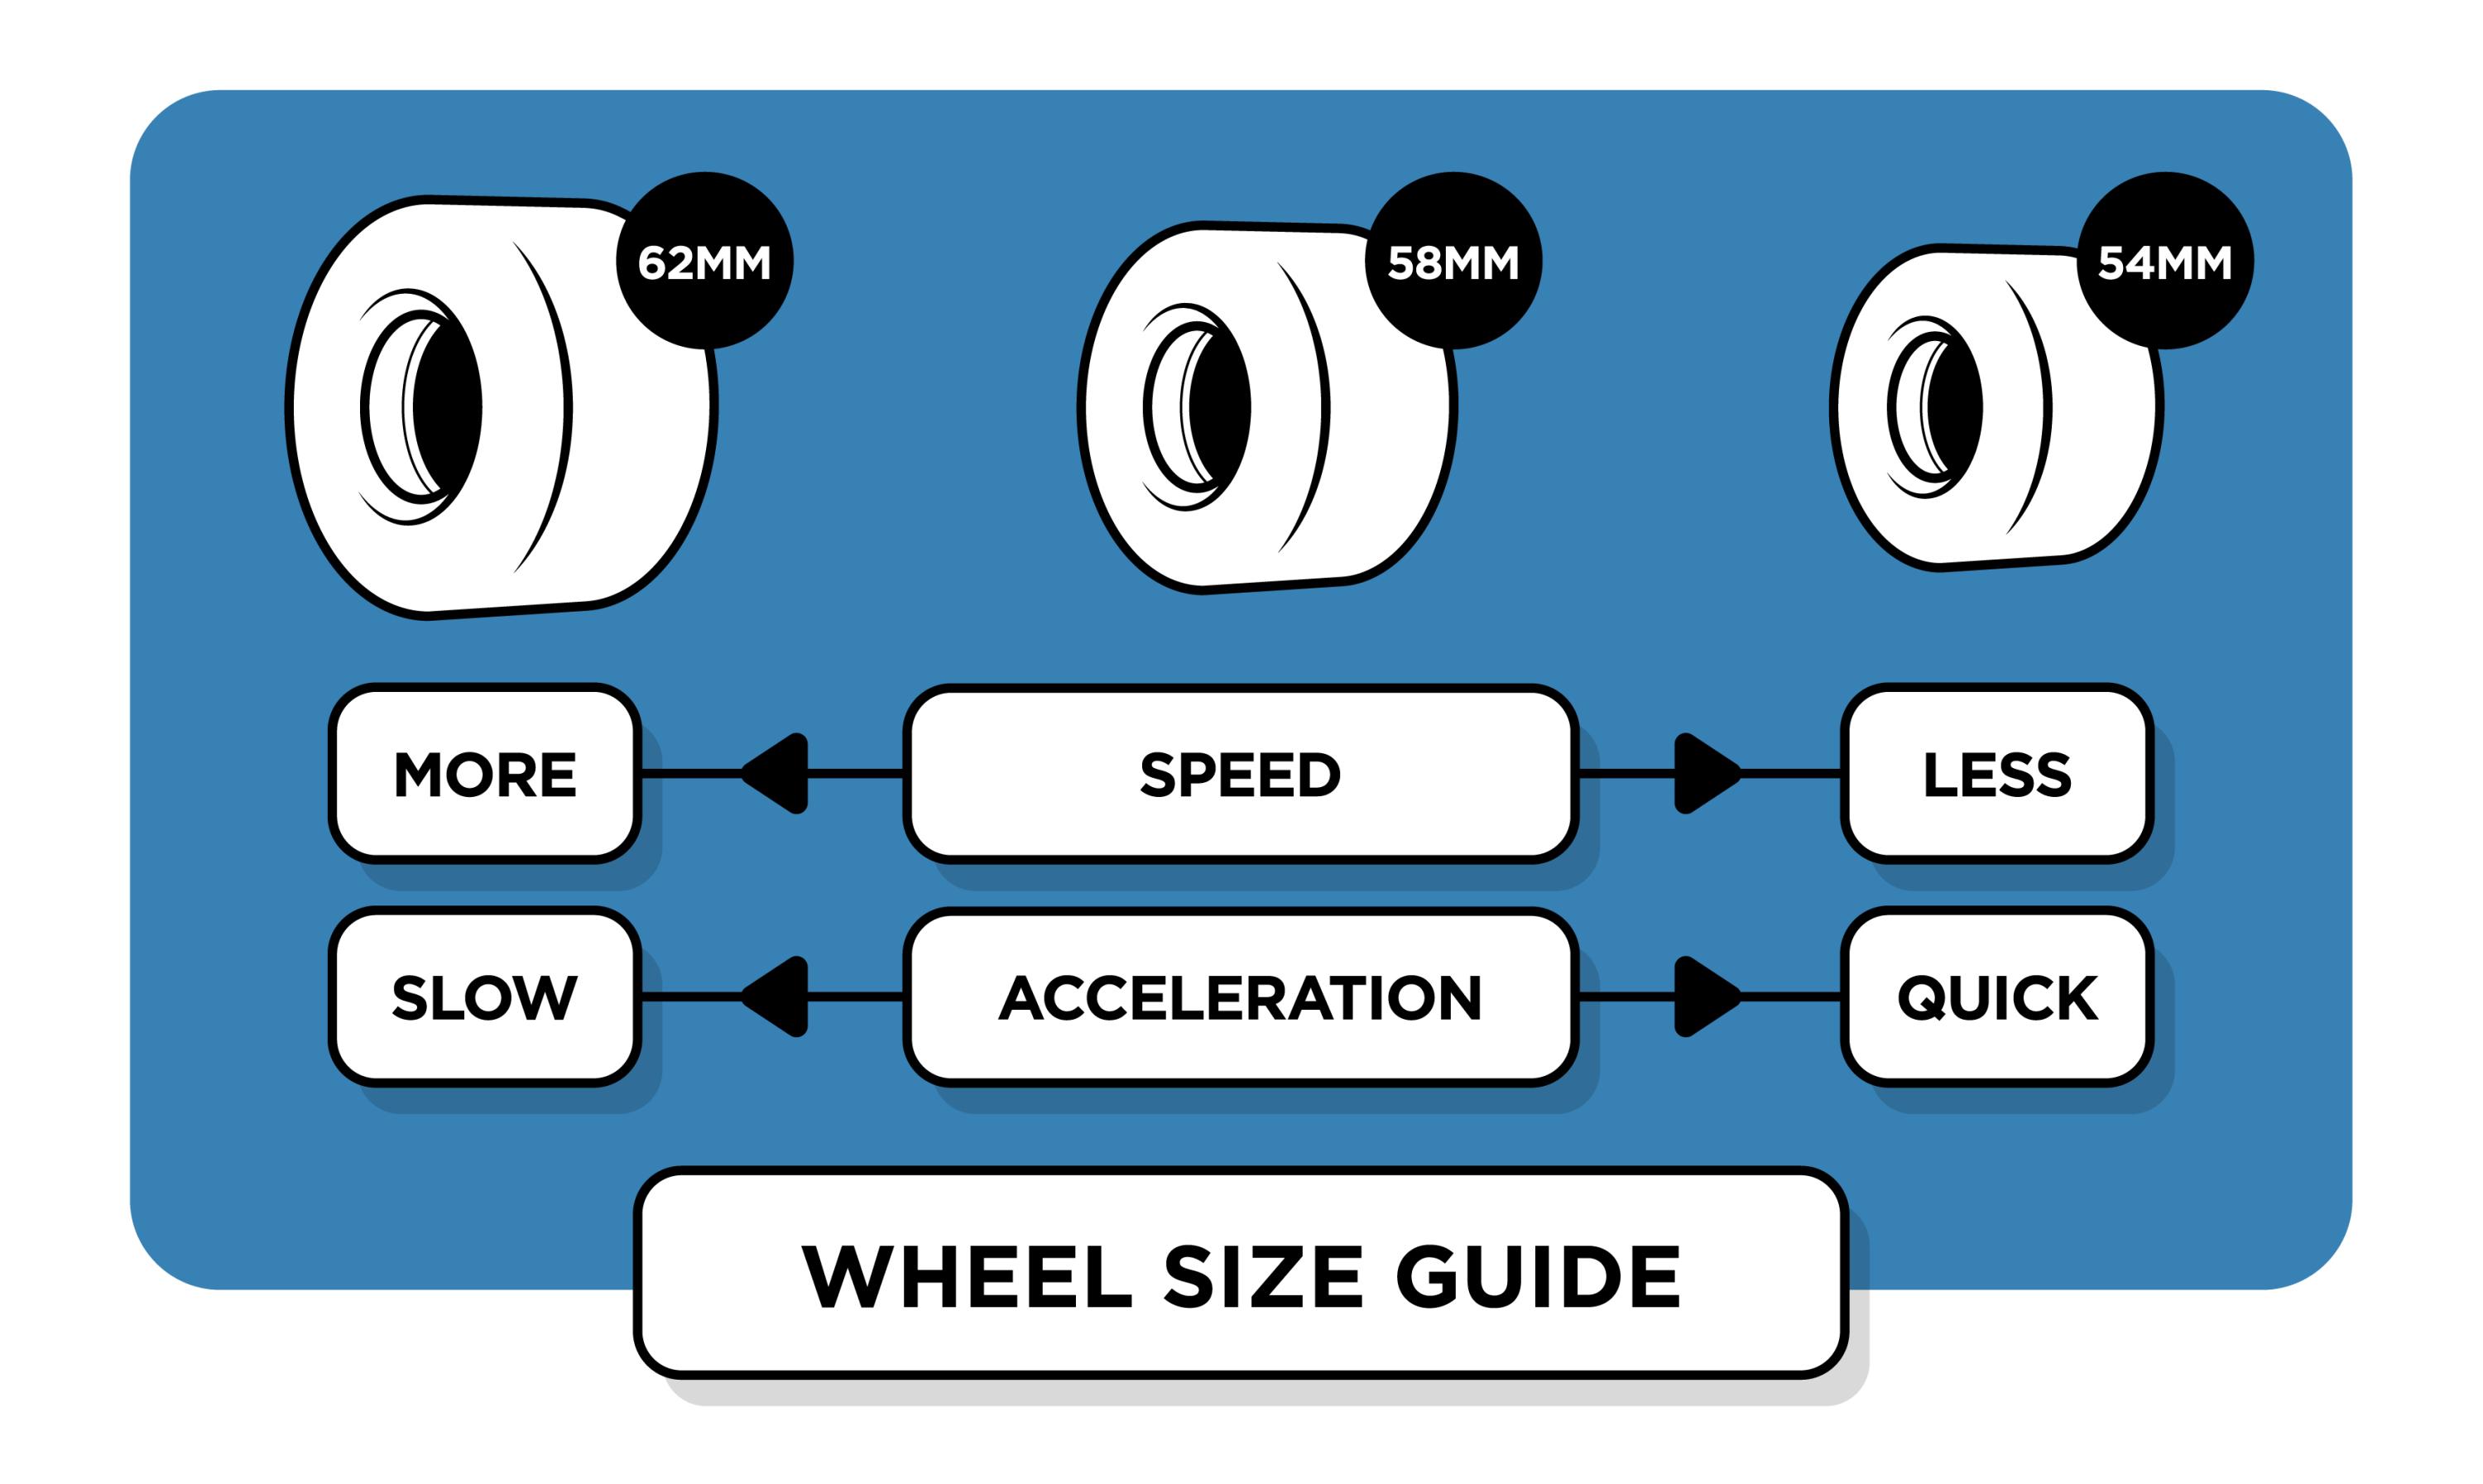 Rookie Wheels size guide infographic